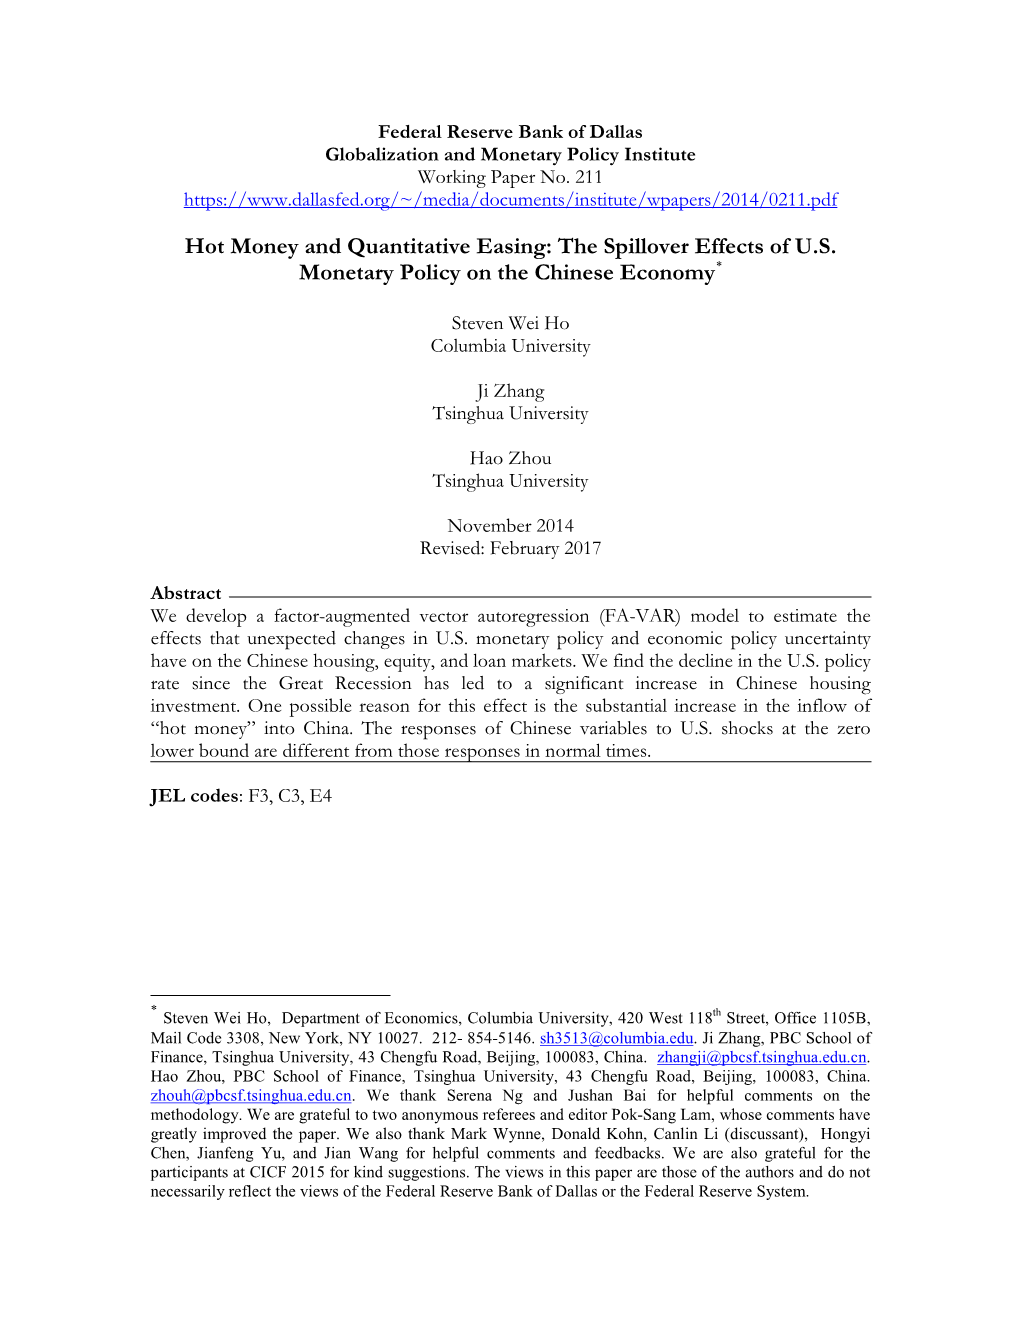 Hot Money and Quantitative Easing: the Spillover Effects of U.S. Monetary Policy on the Chinese Economy*